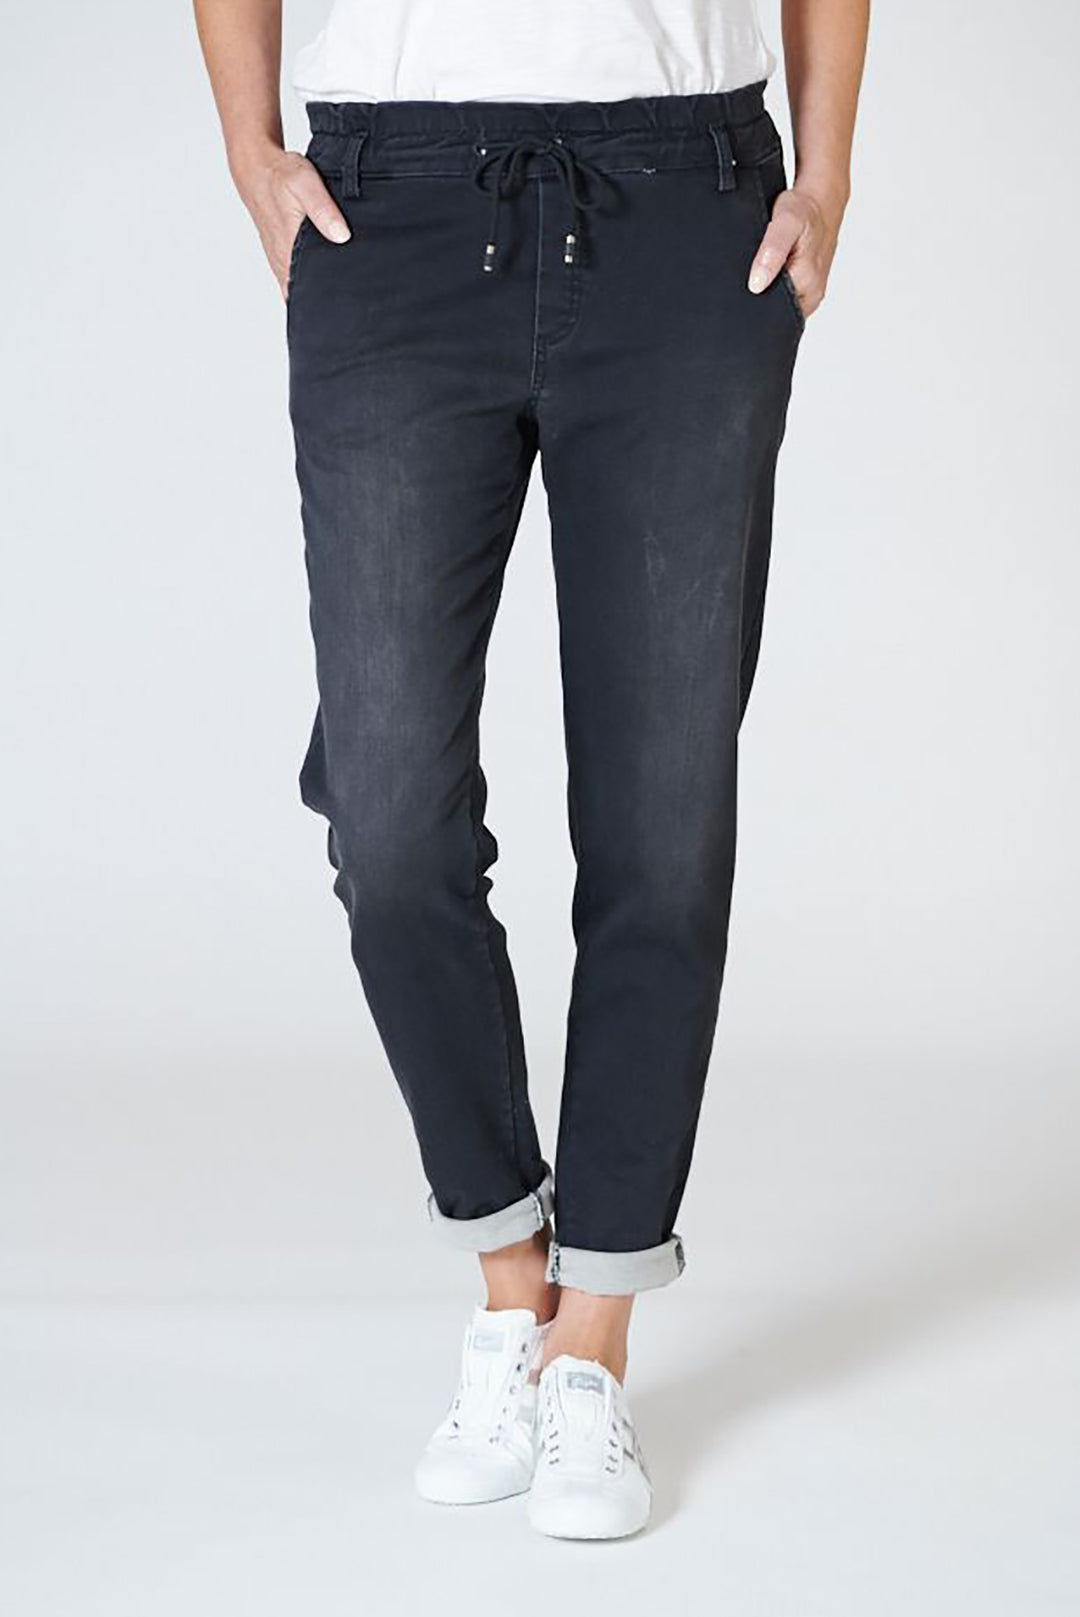 Jagger Stone Washed Pants | Black |  IS13